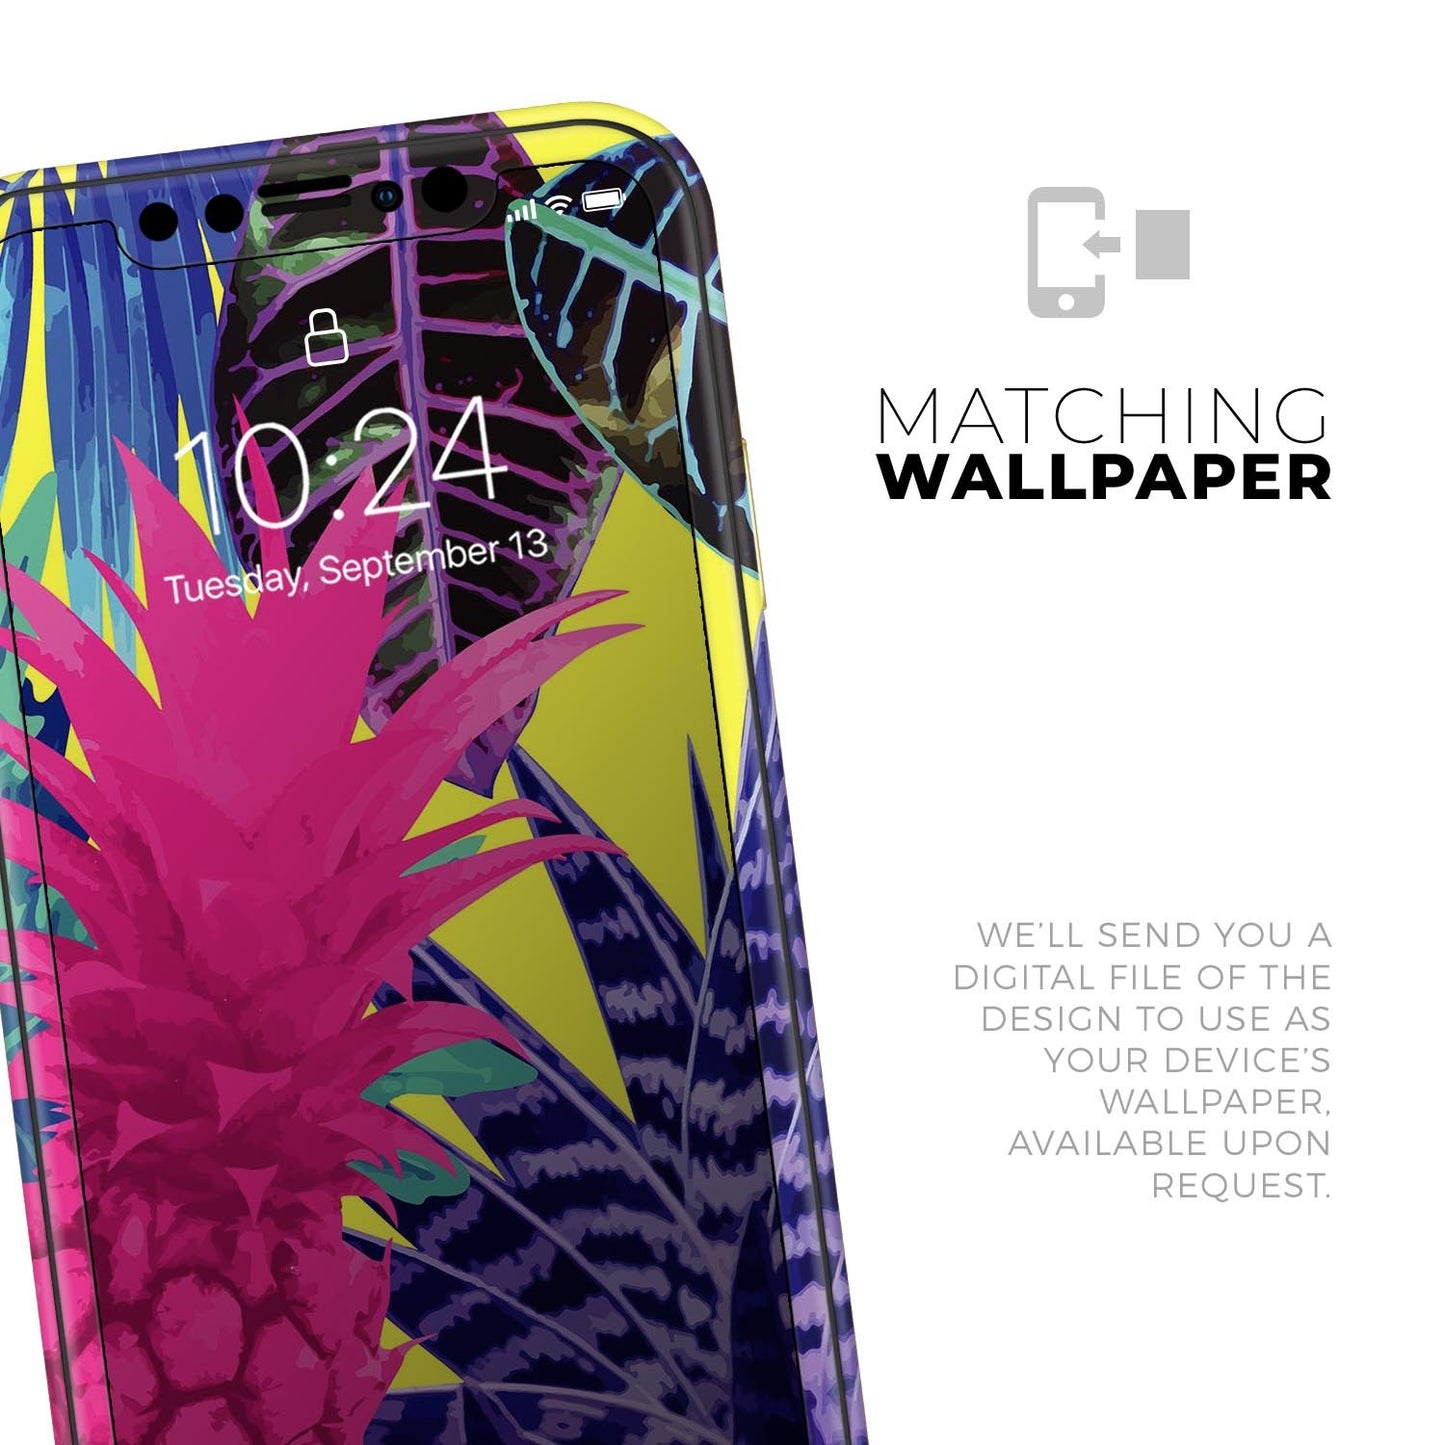 Hype Flourescent Summer Pineapple Pattern - Skin-Kit compatible with